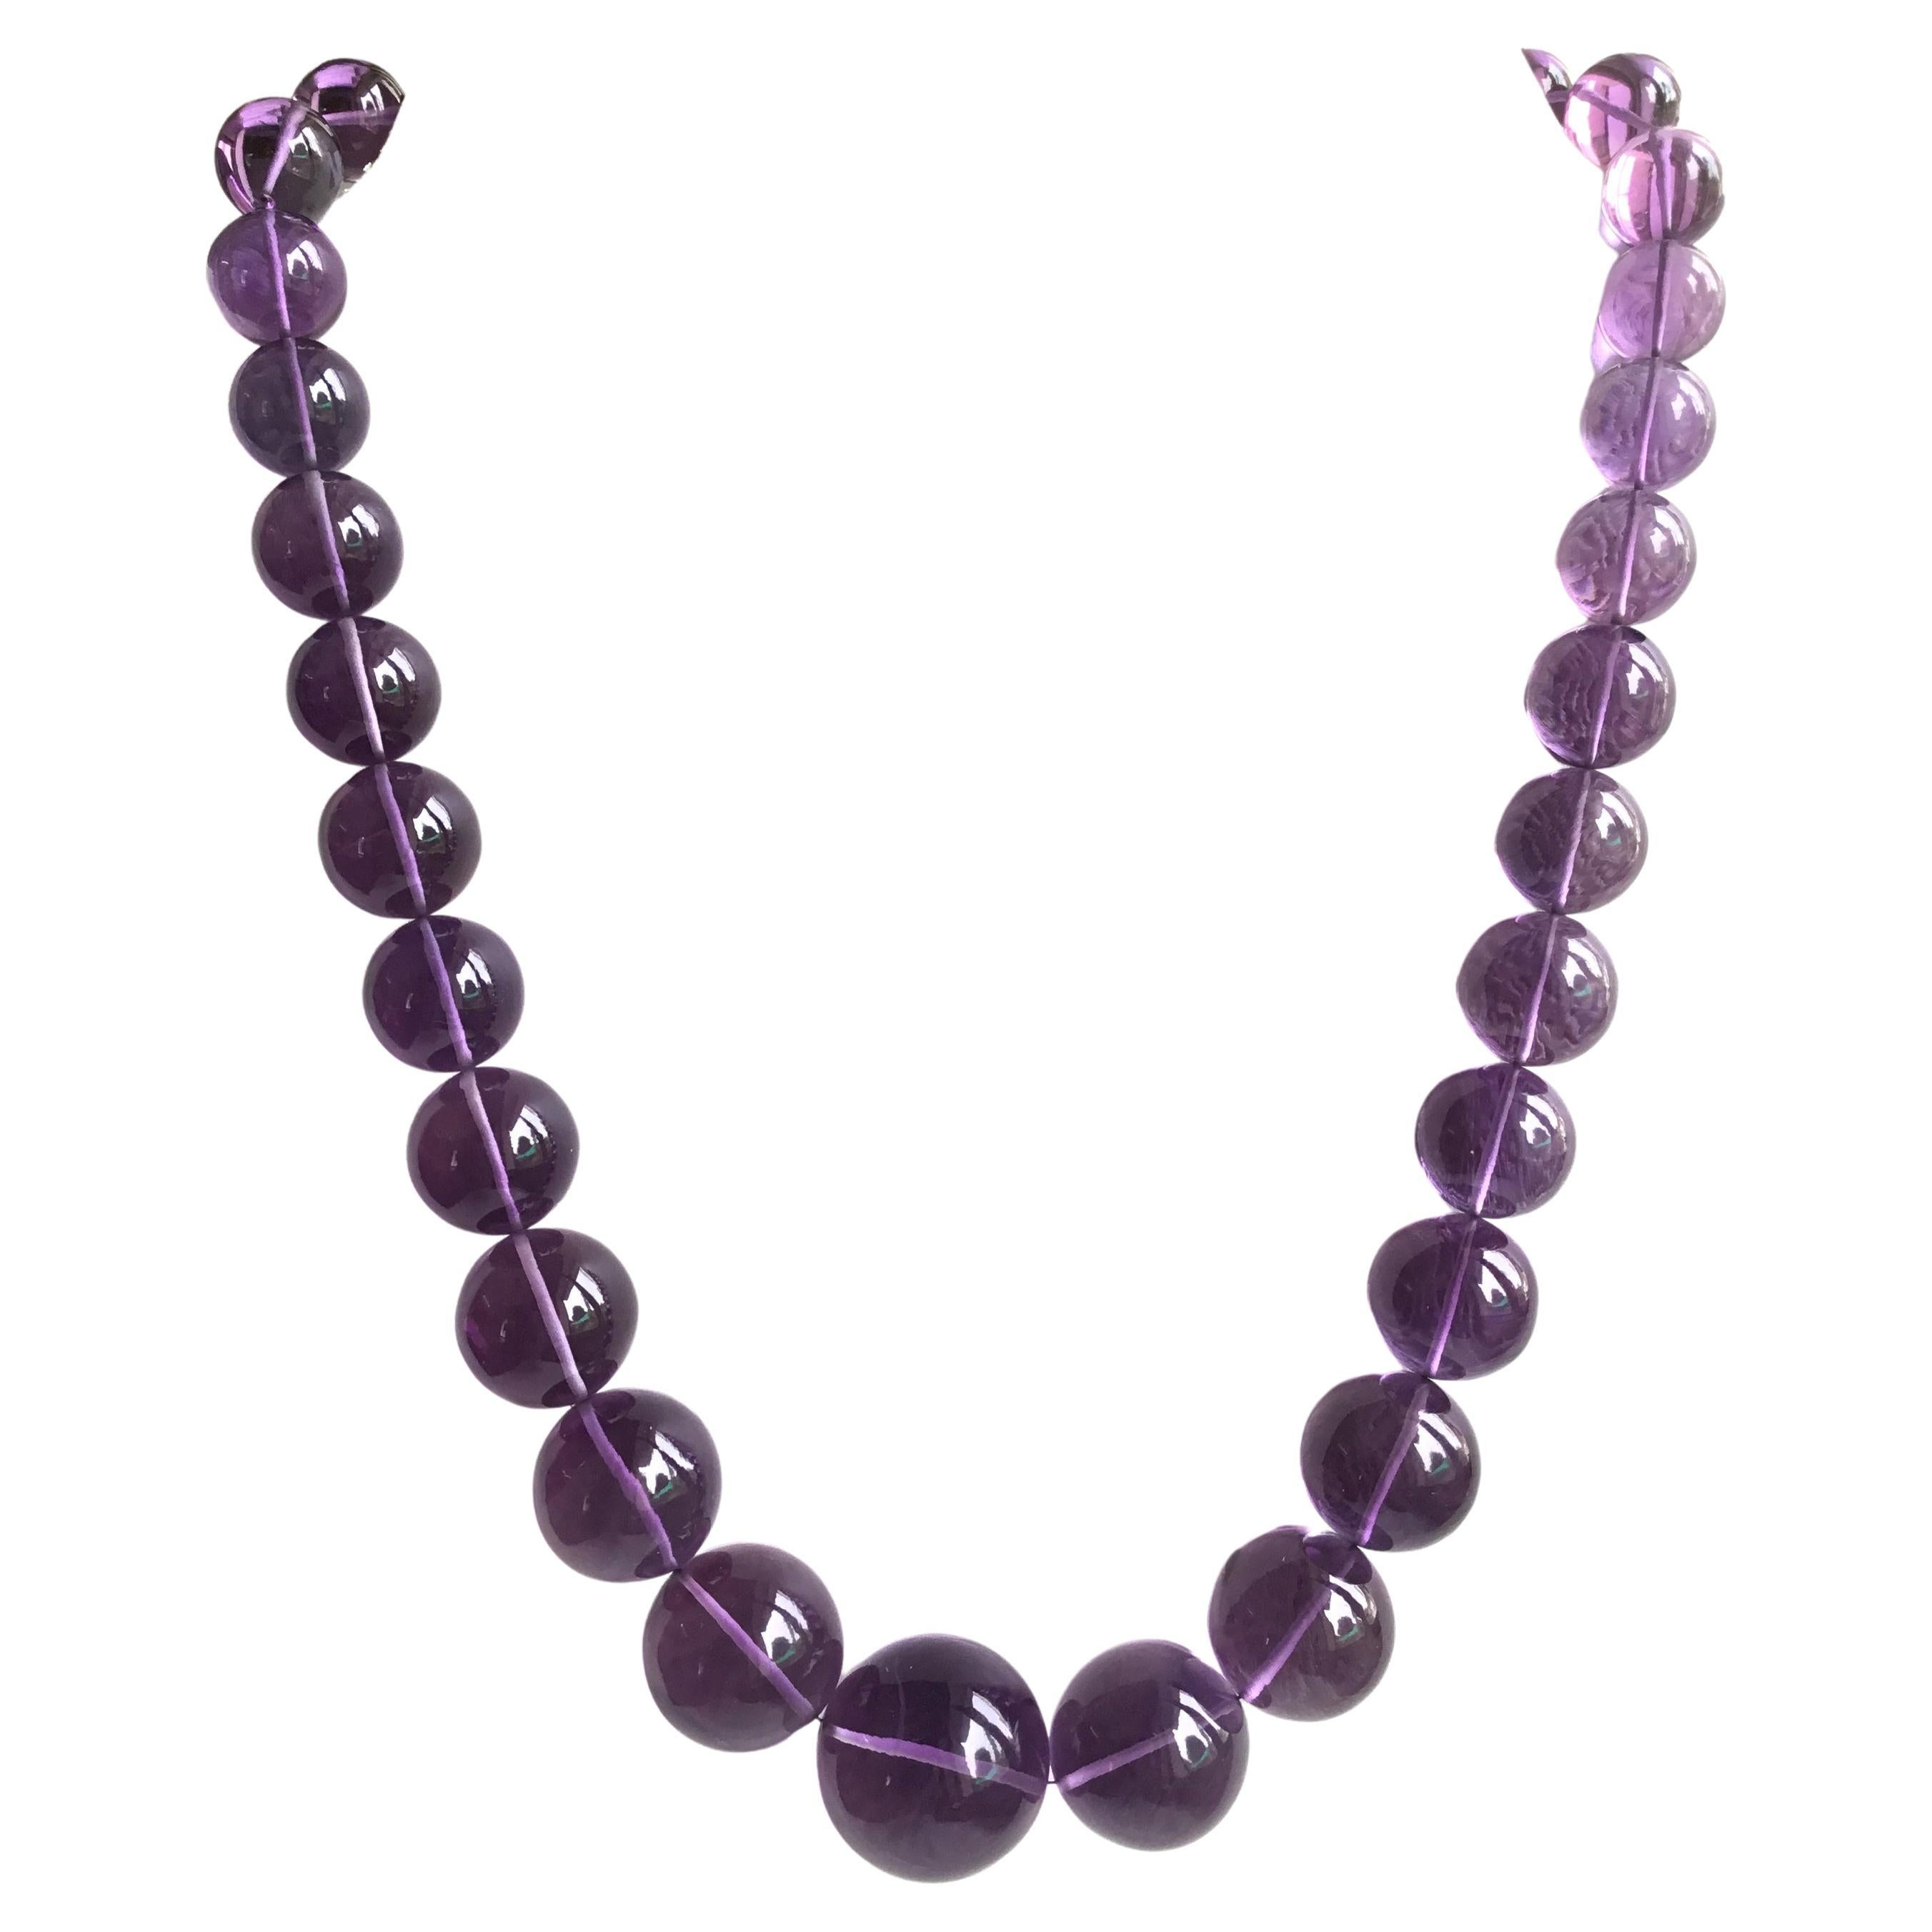 Top Quality Amethyst Balls Necklace Loupe Clean For Sale